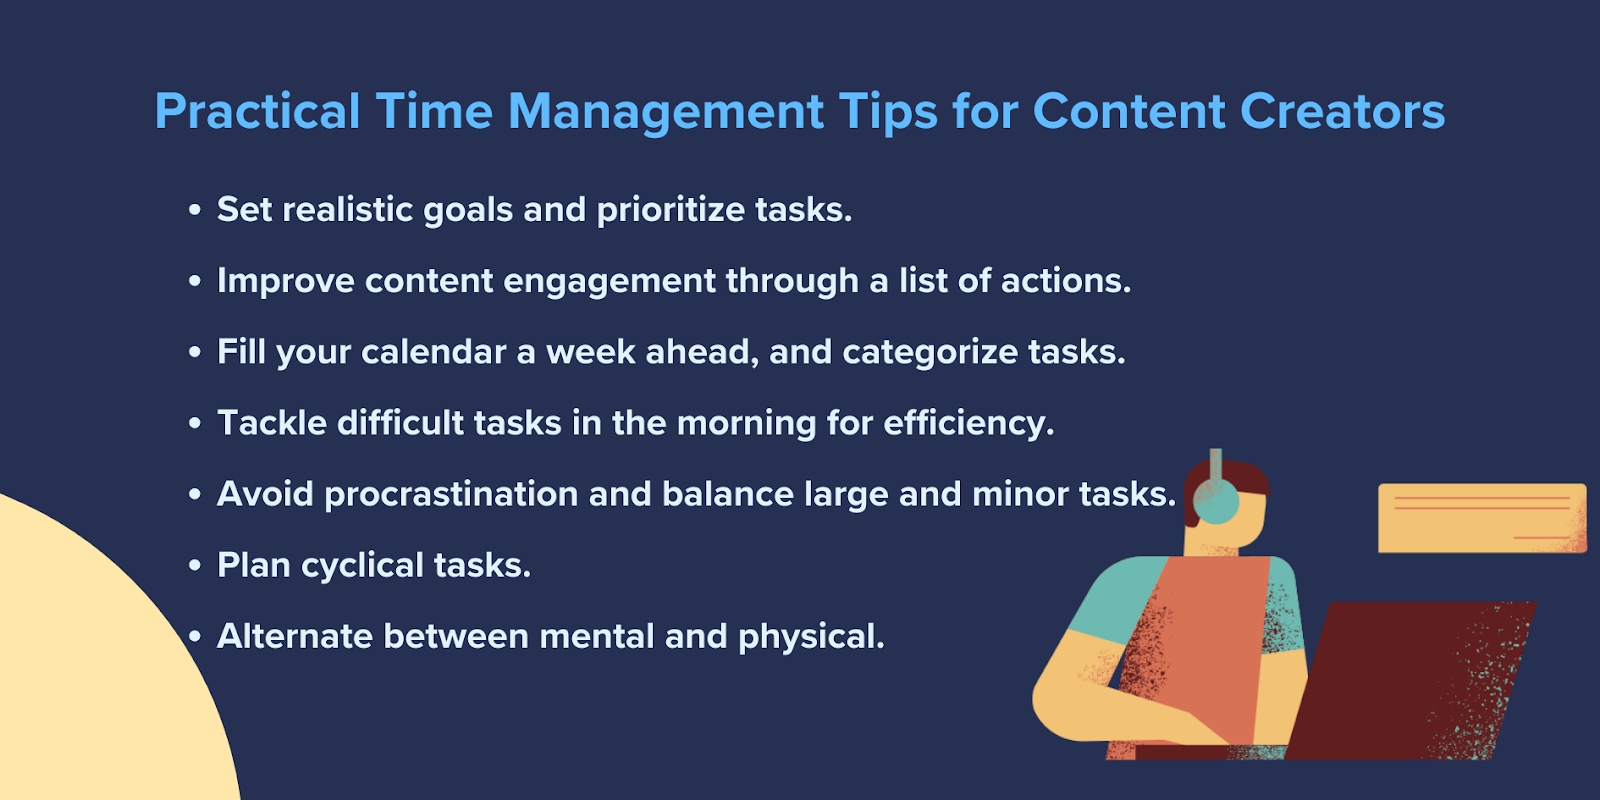 Practical time management tips for content creators